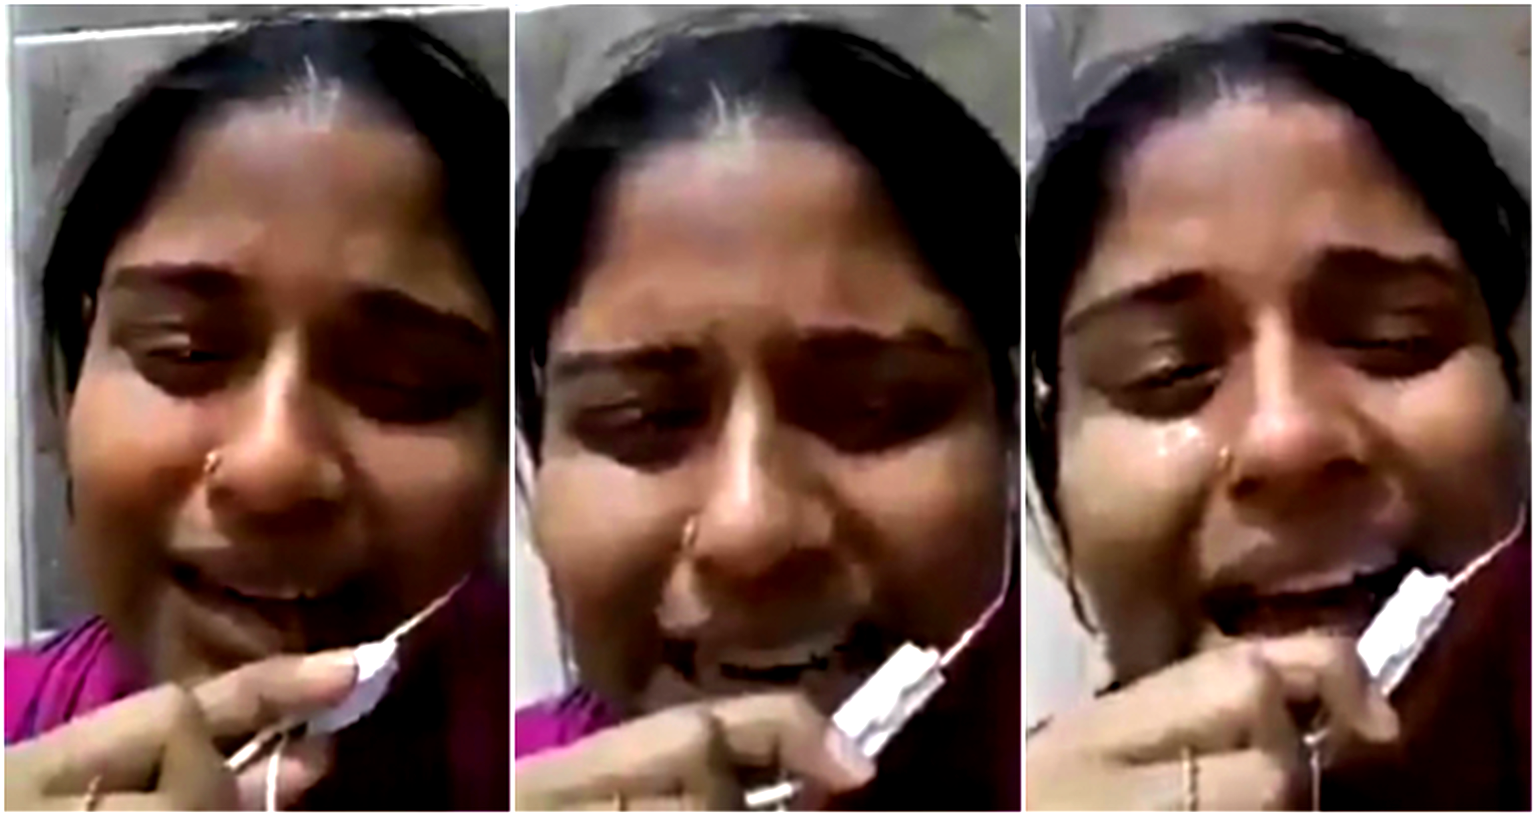 Bangladeshi Maid Cries for Help After Saudi Family Allegedly Doused Her With HOT OIL